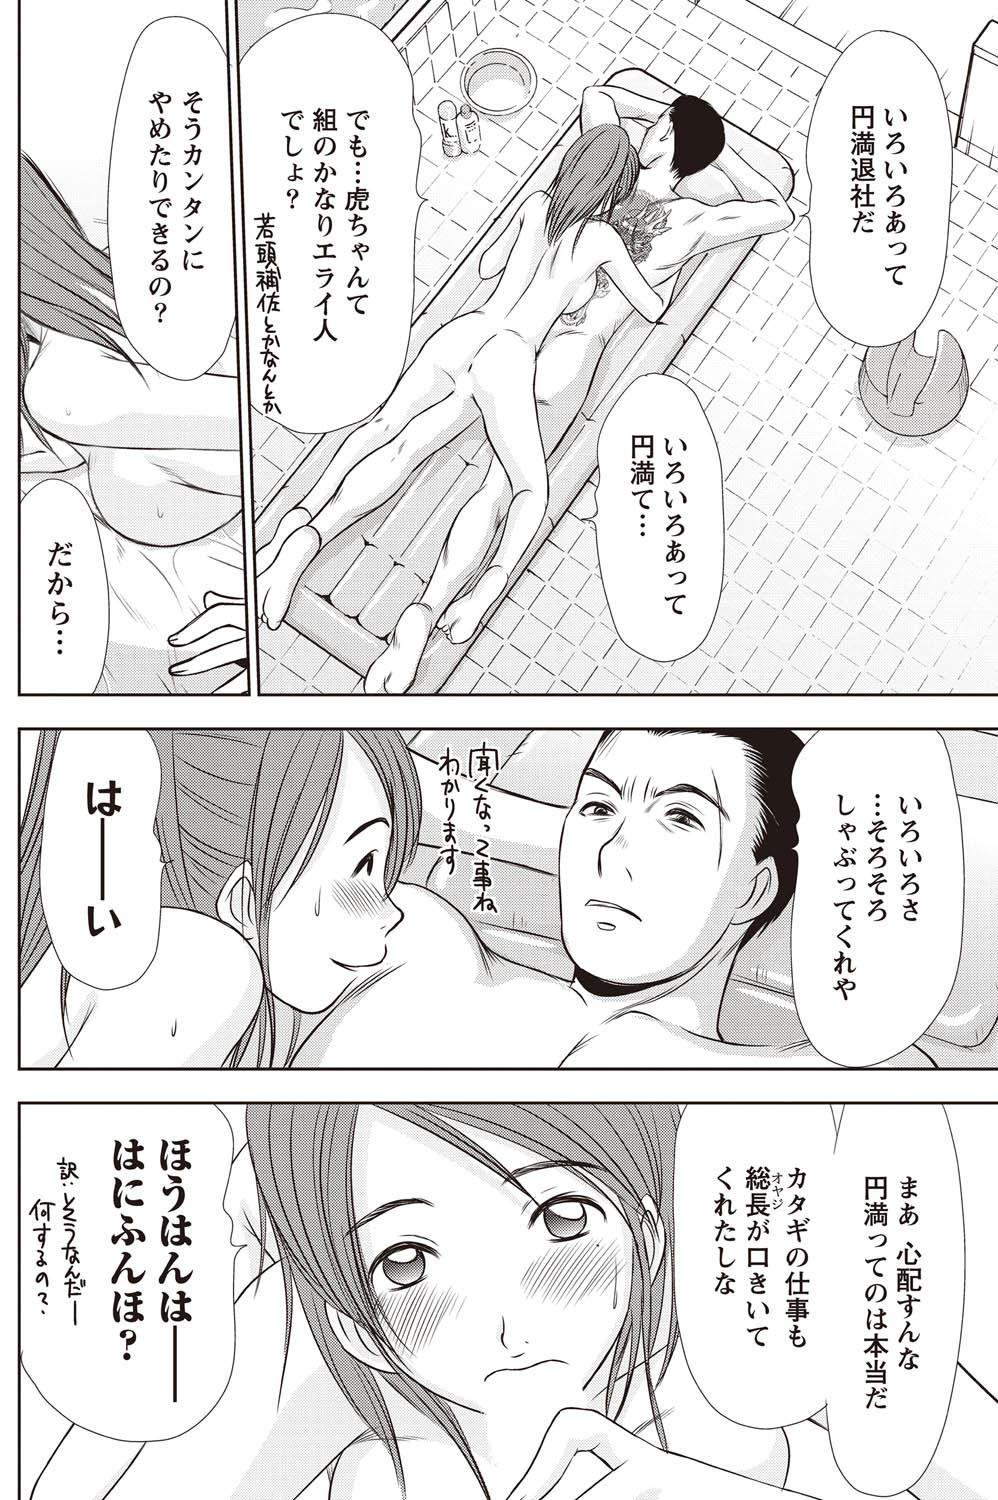 Asians Idol no Oheya chapters ch. 1-20 Best Blow Job Ever - Page 3